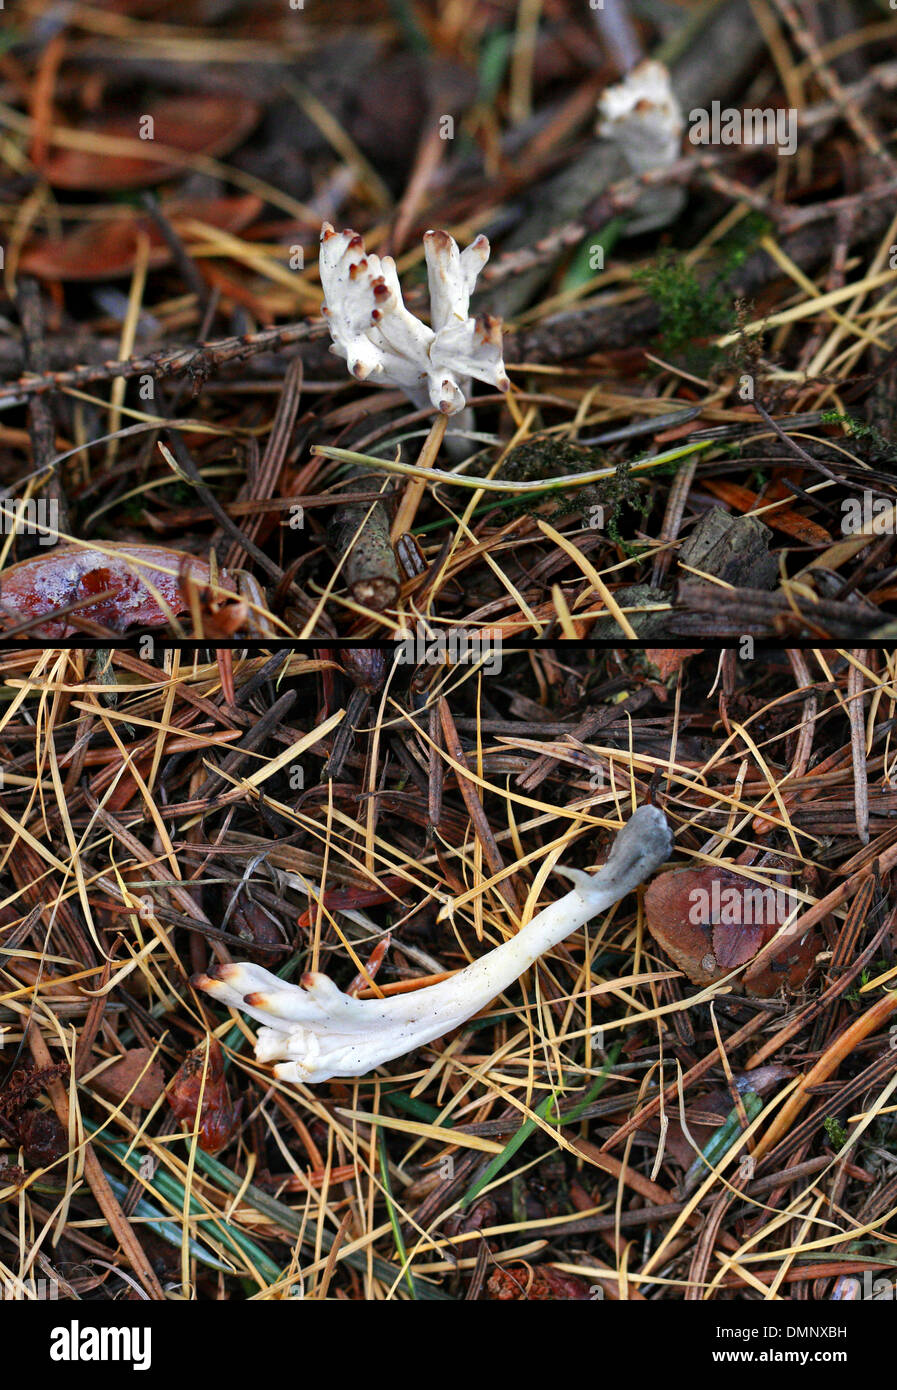 Wrinkled Coral Fungus, Clavulina rugosa, Clavulinaceae. Specimen found growing in a group under a pine tree (November). 2 Images Stock Photo